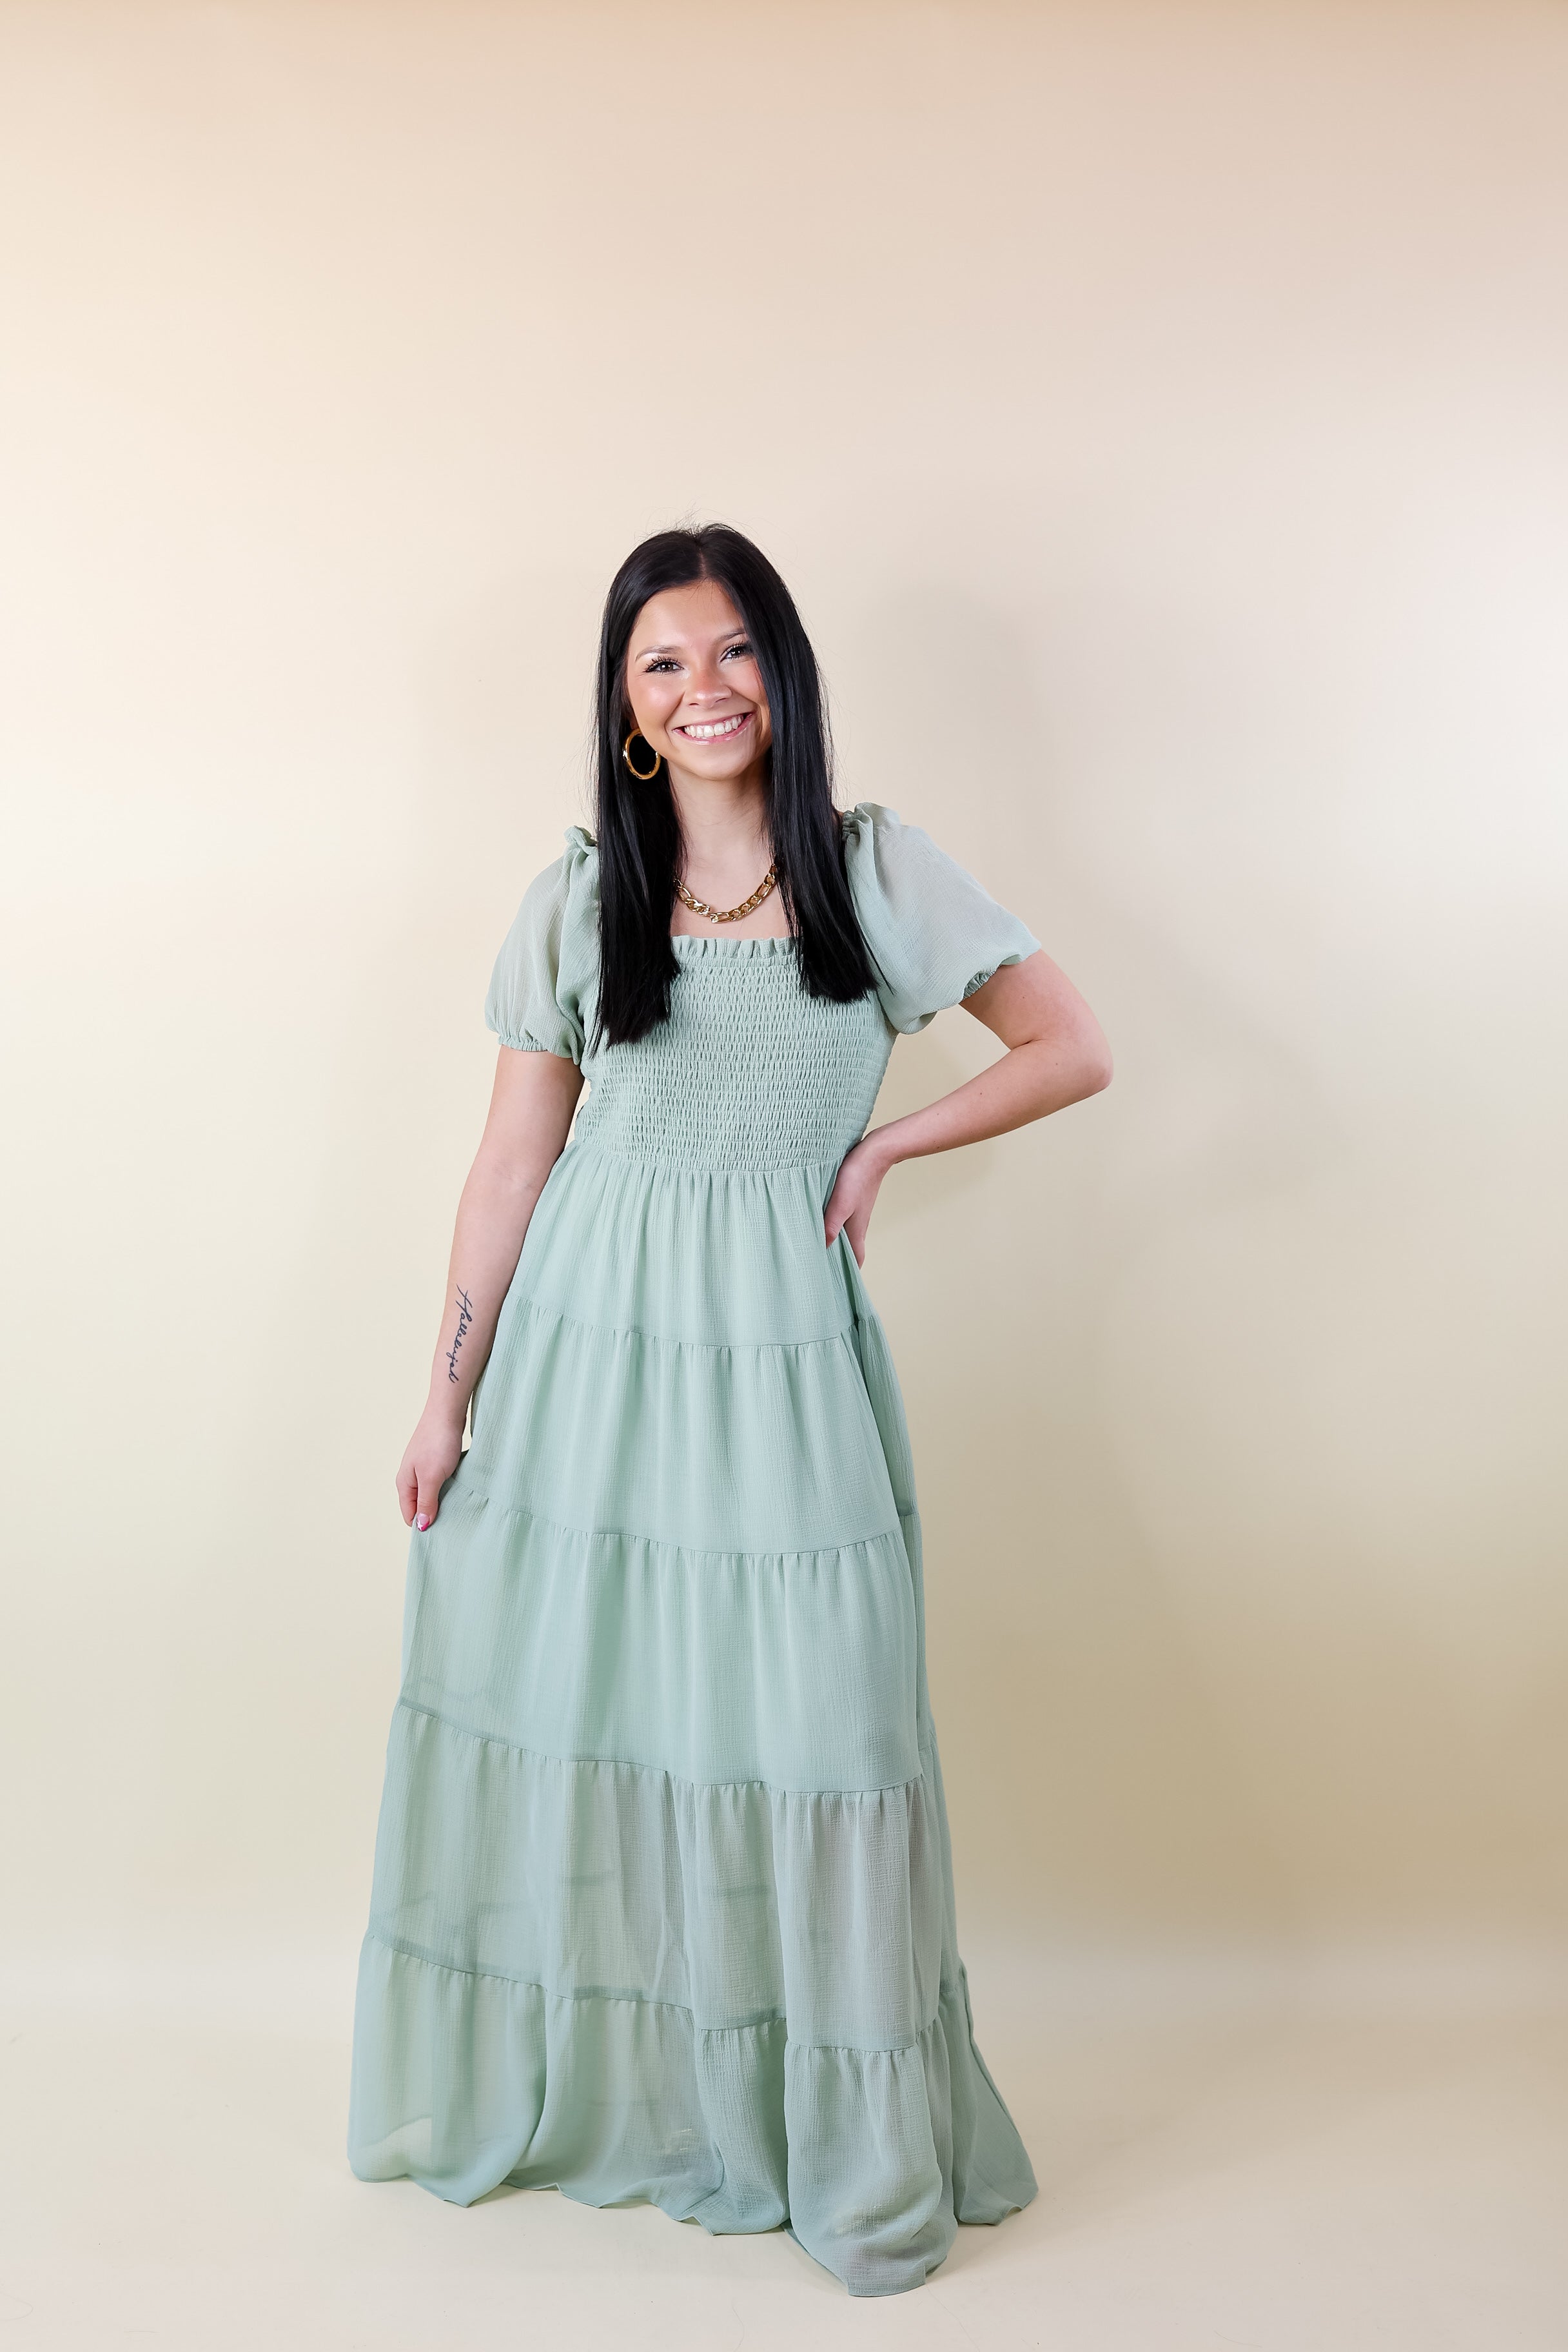 Honeysuckle Love Tiered Maxi Dress with Smocked Bodice in Sage Green - Giddy Up Glamour Boutique